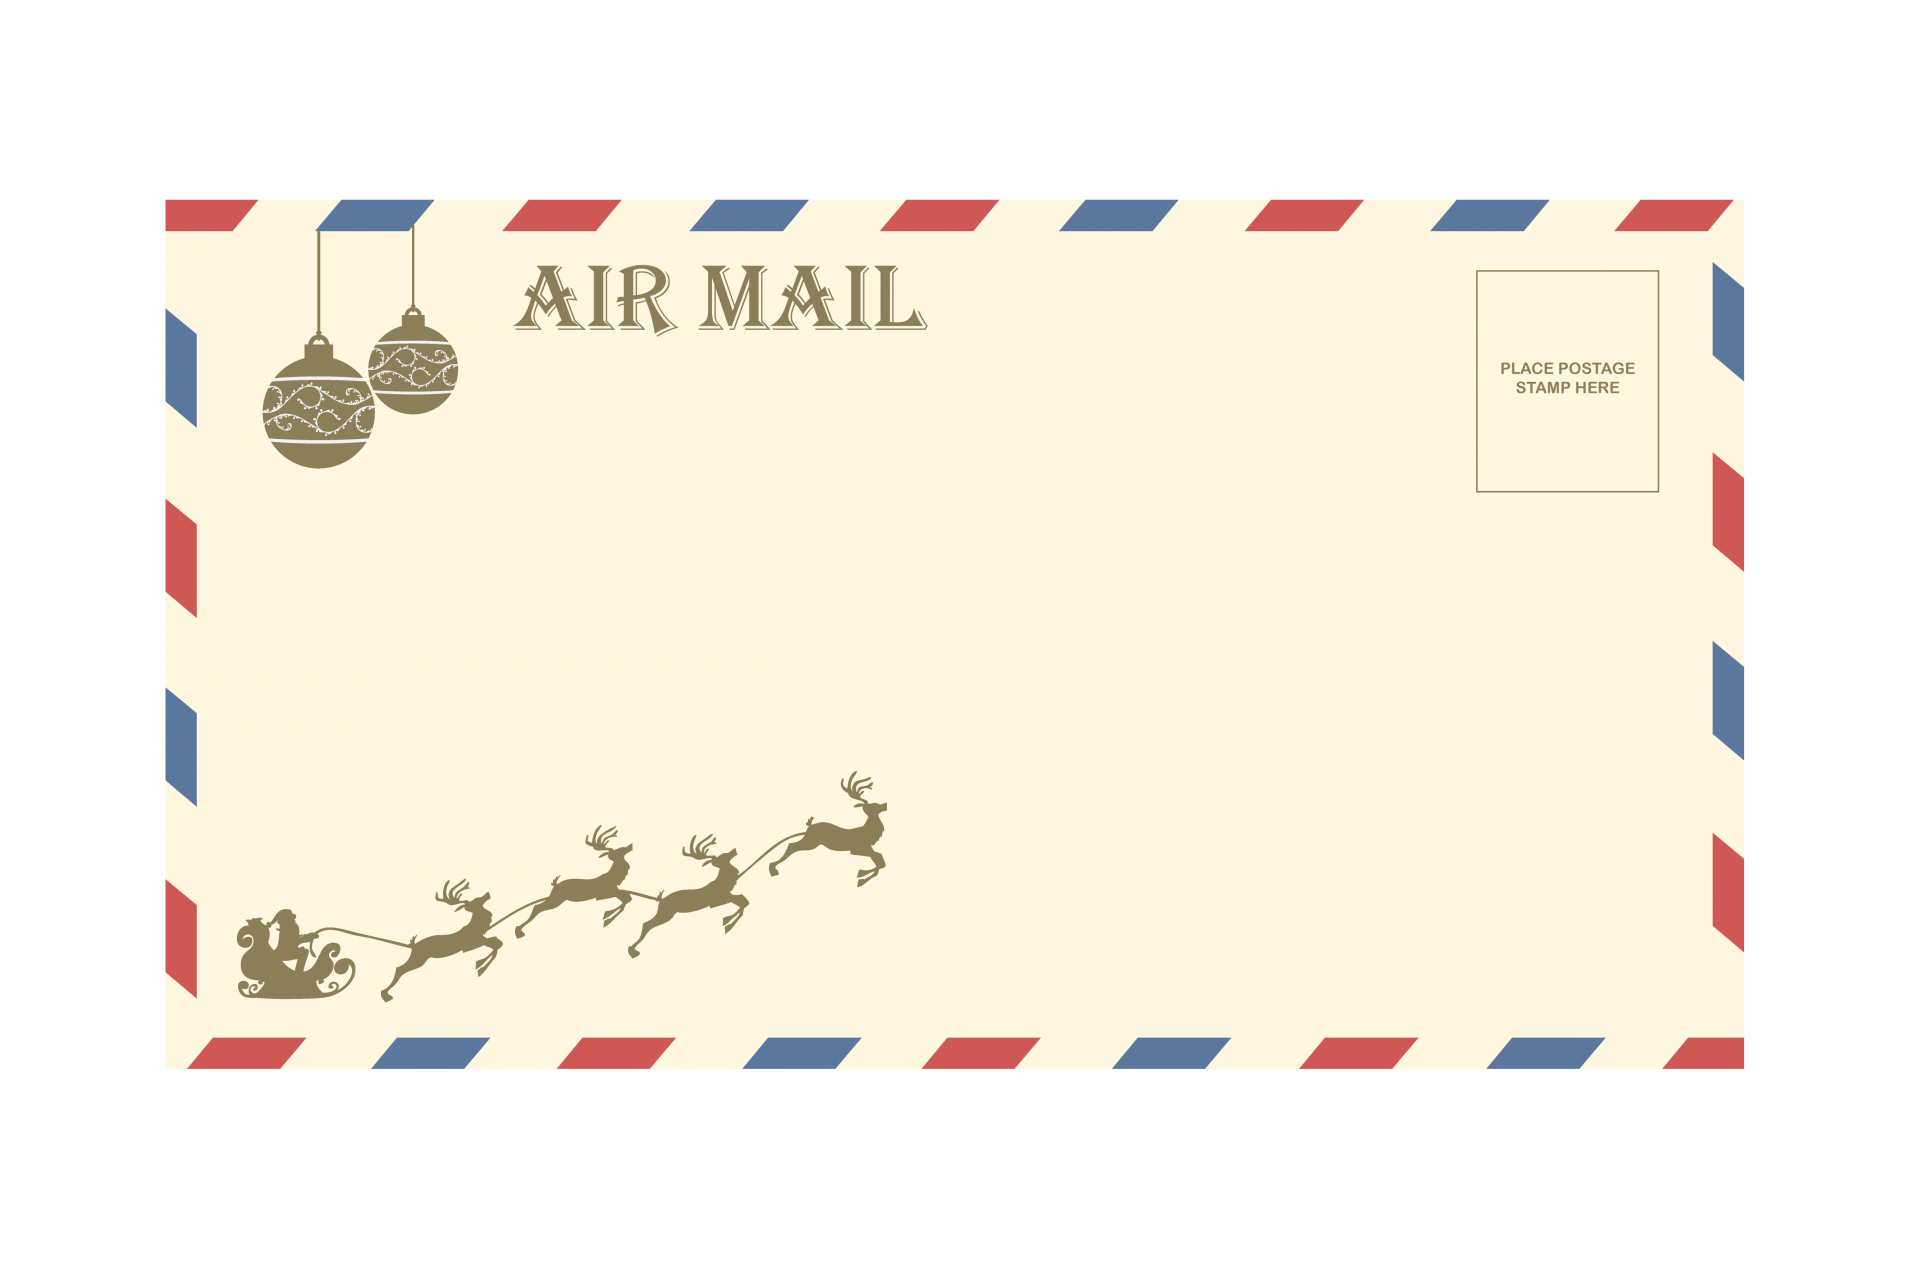 Air mail envelope with christmas santa in sleigh with reindeer